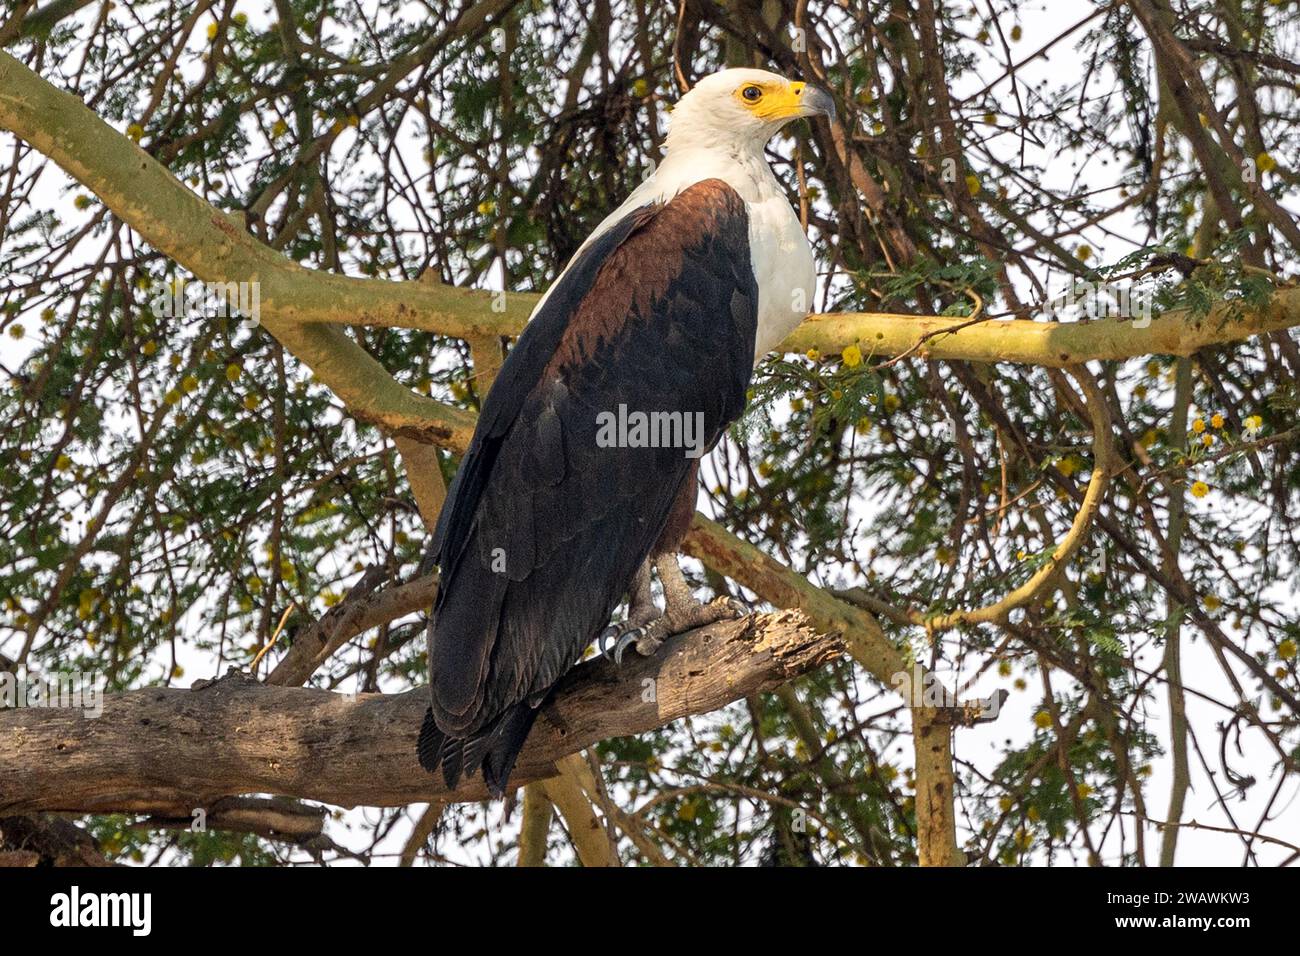 Afriican Fish Eagle, female, perched in a fever tree, Liwonde National Park, Malawi Stock Photo